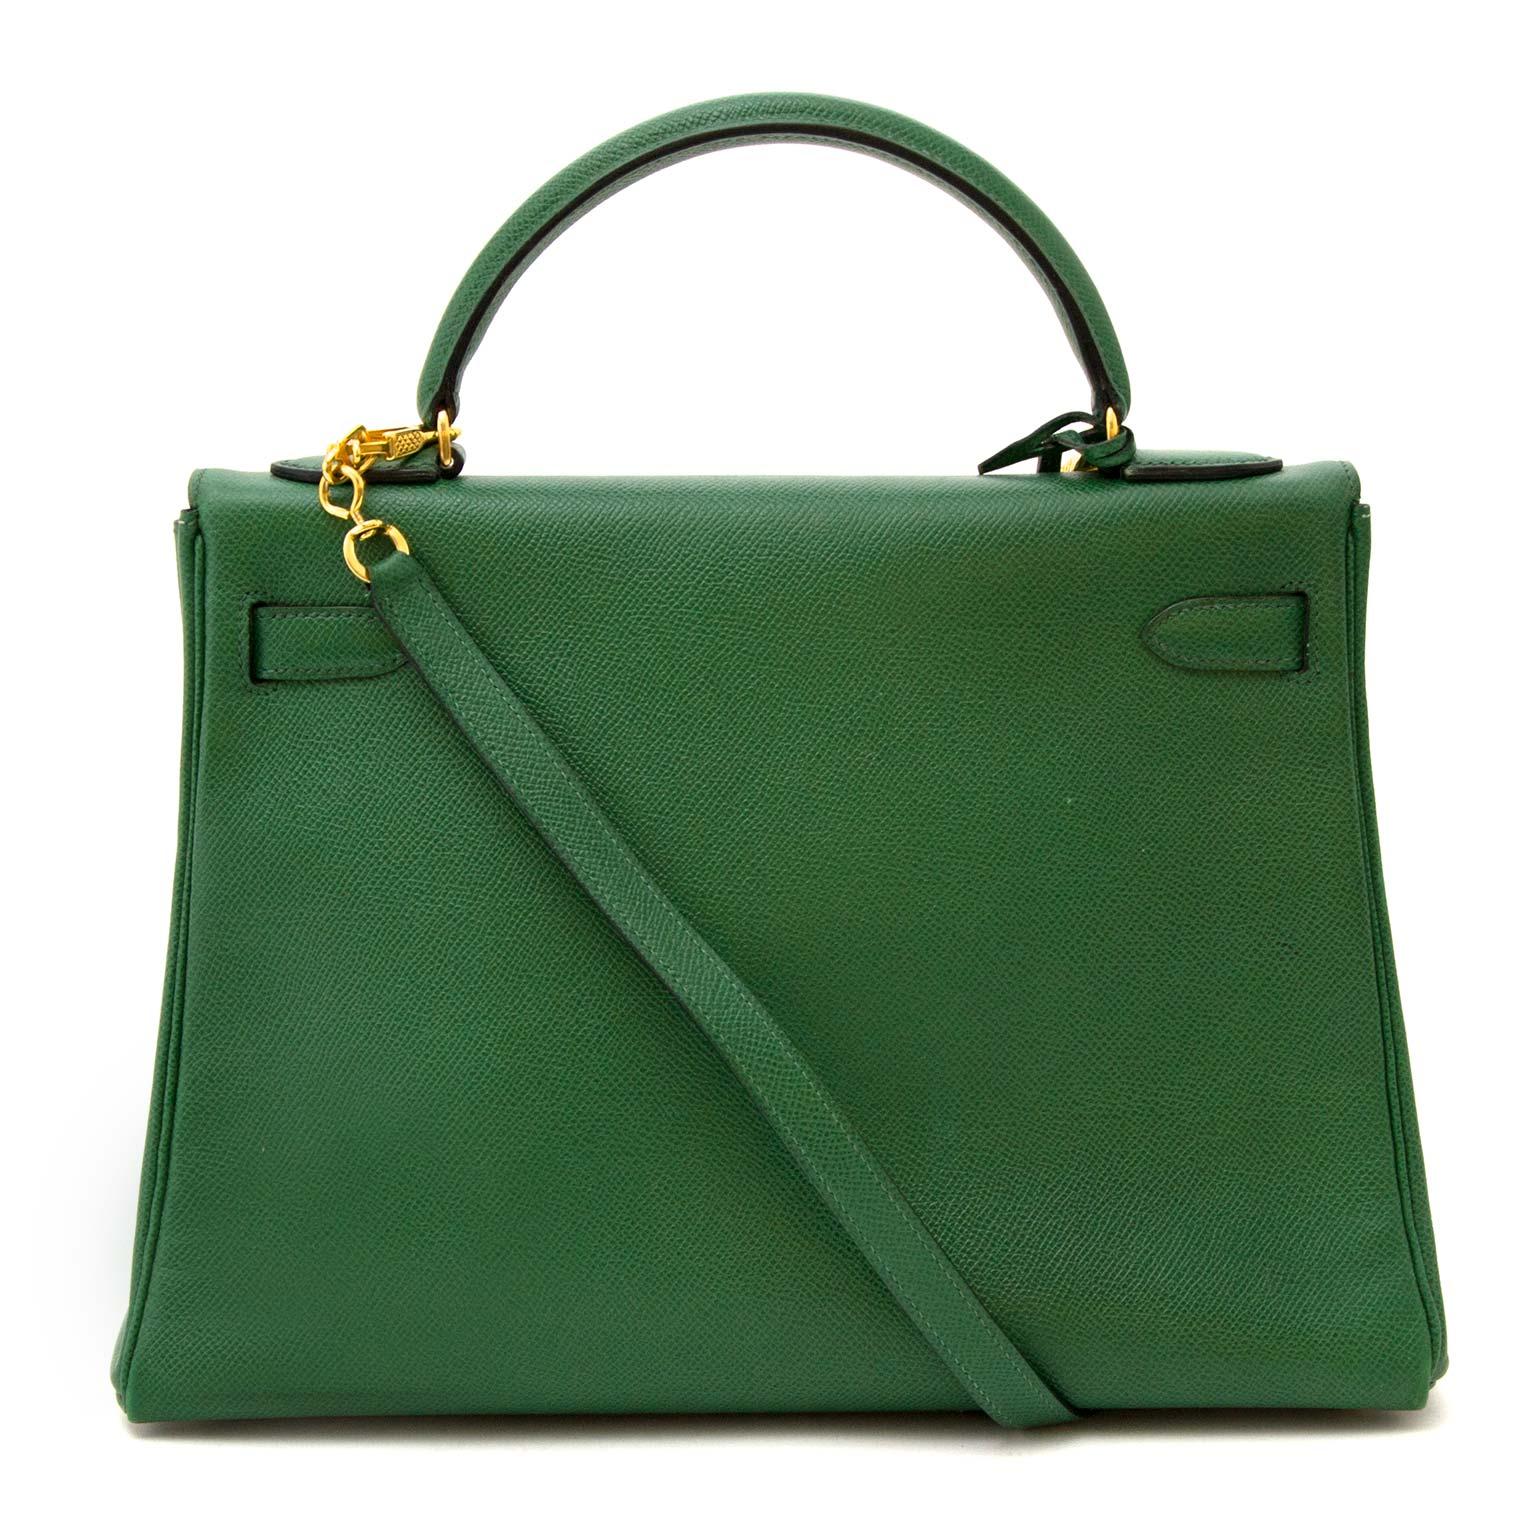 Very Good Vintage Condition

Hermes Kelly 32 Vert Bengal Courchevel Leather

Join the elite group of Hermes enthusiasts with this stunning 32cm Kelly handbag!
The bag is made of premium vert benegal courchevel leather and detailed with gold plated